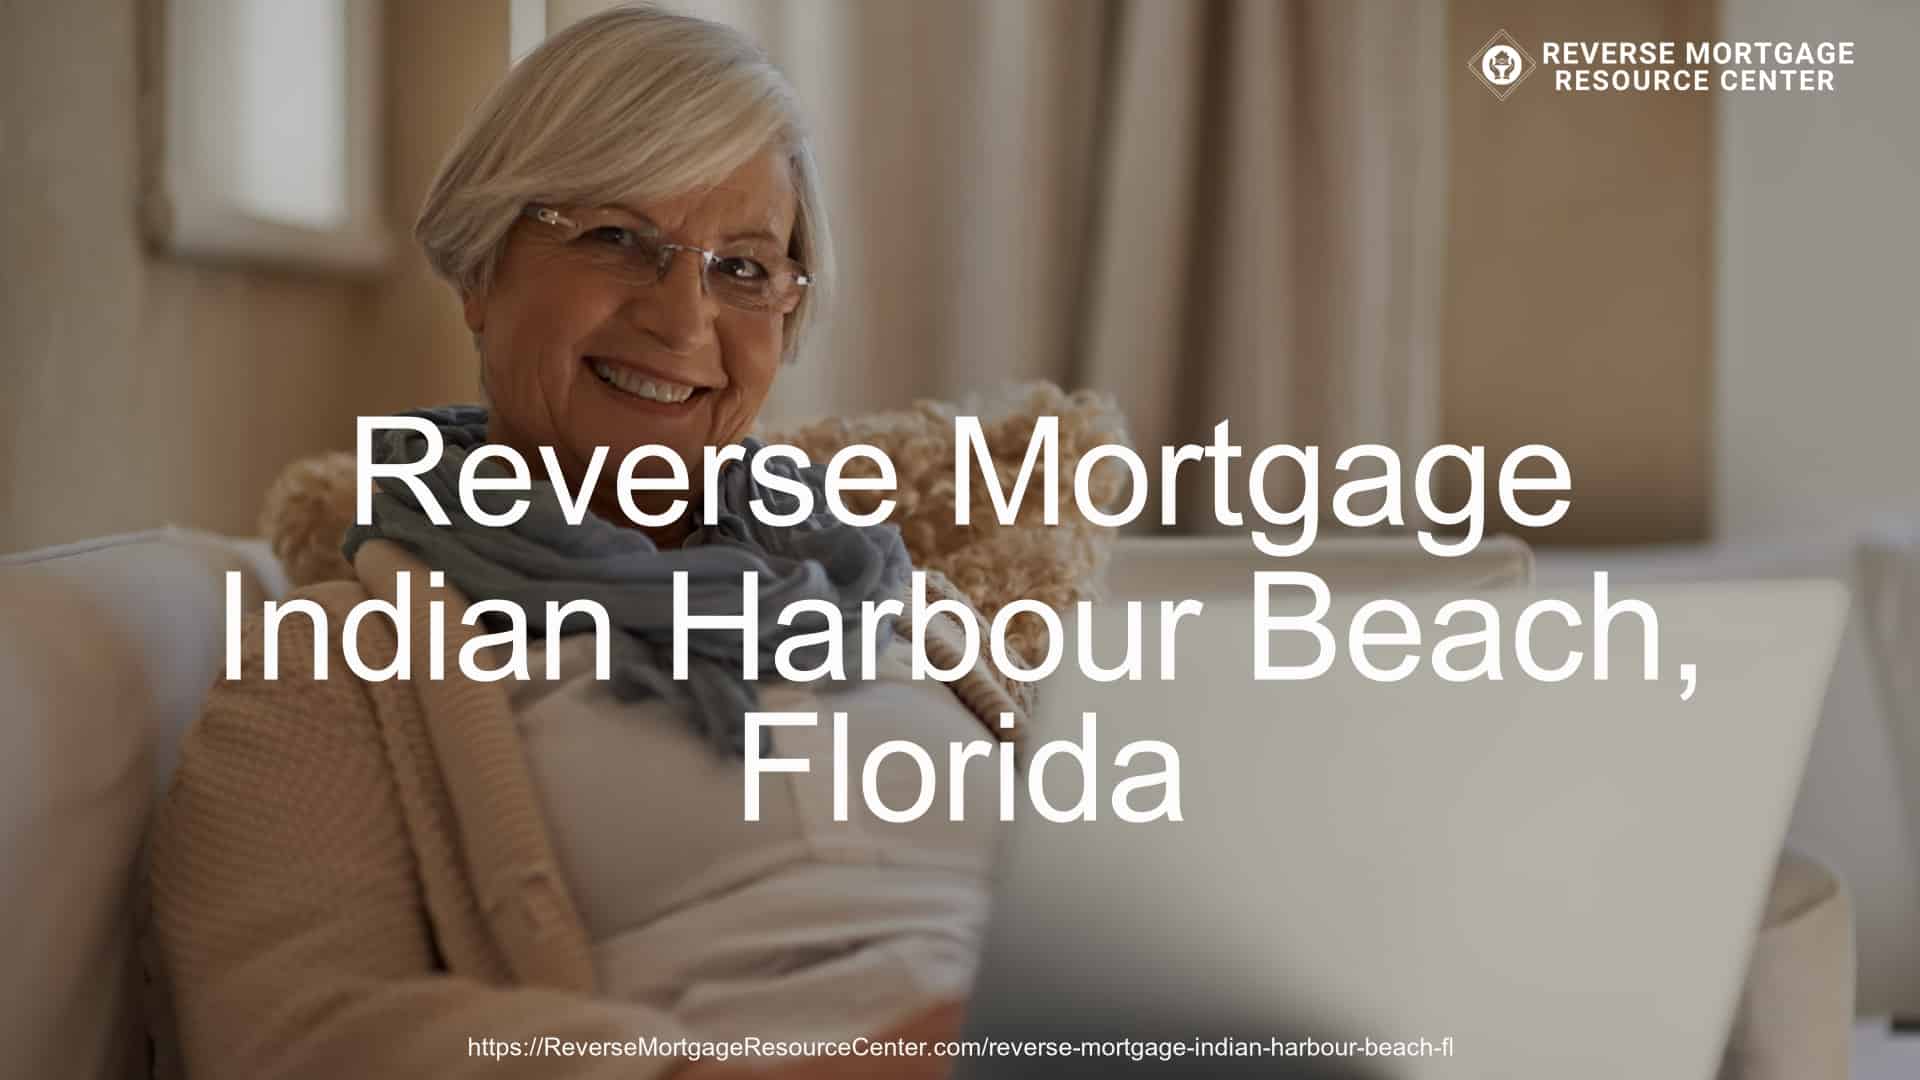 Reverse Mortgage in Indian Harbour Beach, FL